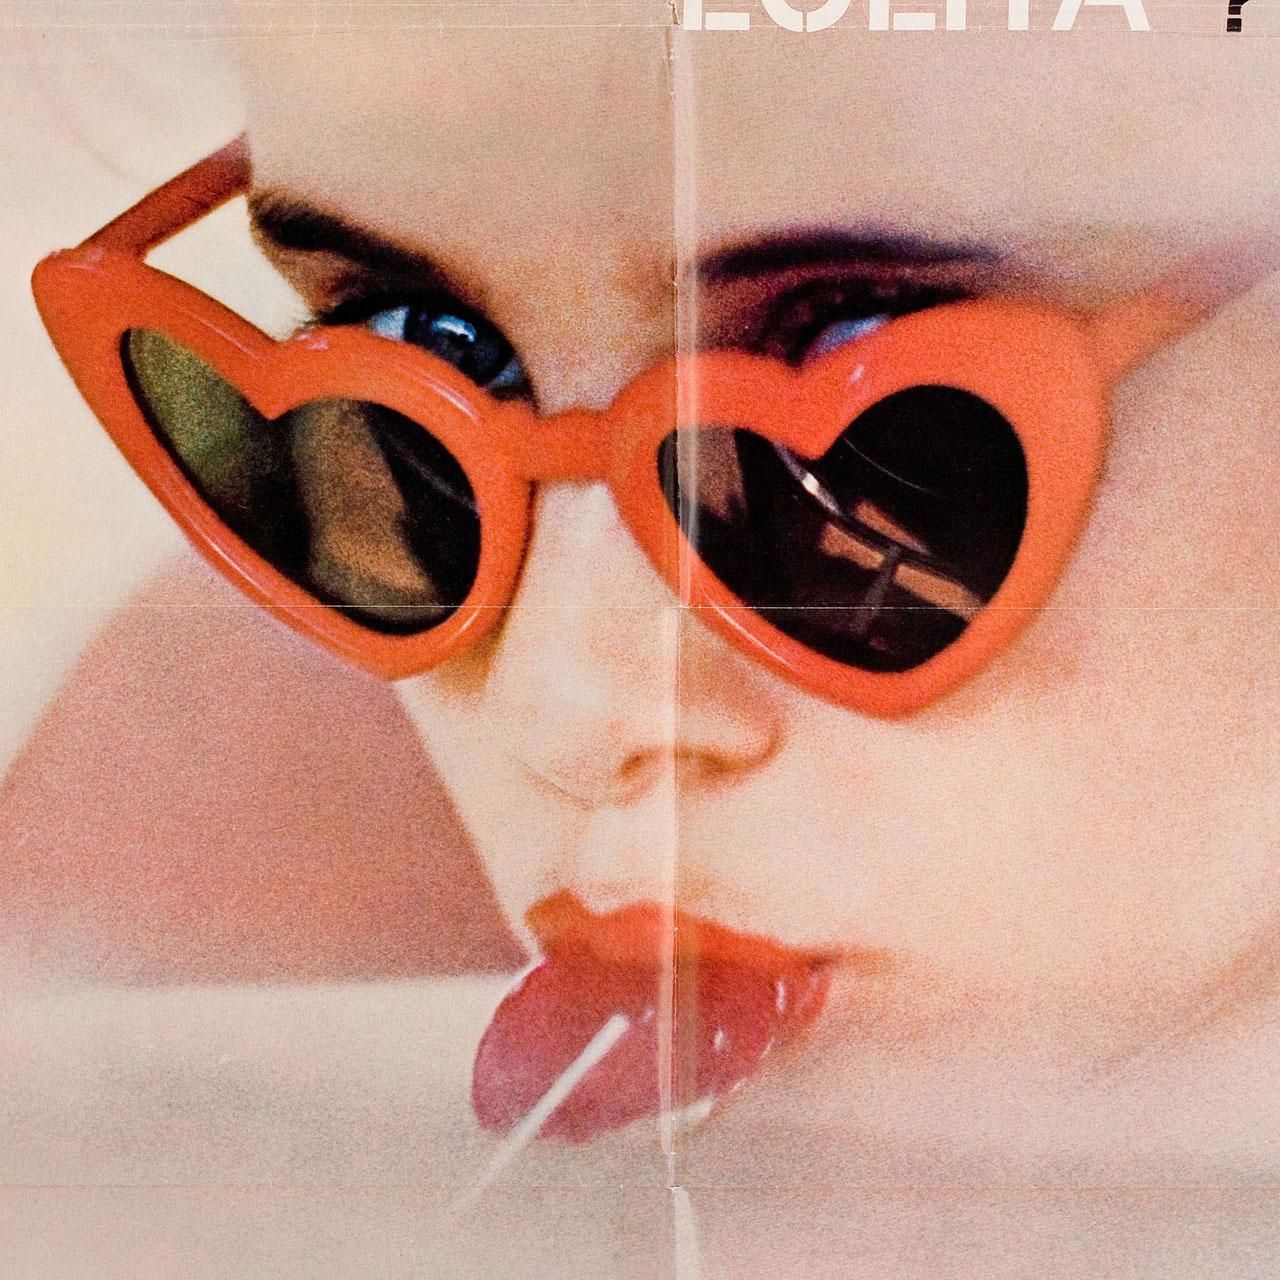 Original 1962 U.S. one sheet poster for the 1962 film Lolita directed by Stanley Kubrick with James Mason and Shelley Winters. Very good-fine condition, folded with pinholes. Many original posters were issued folded or were subsequently folded.